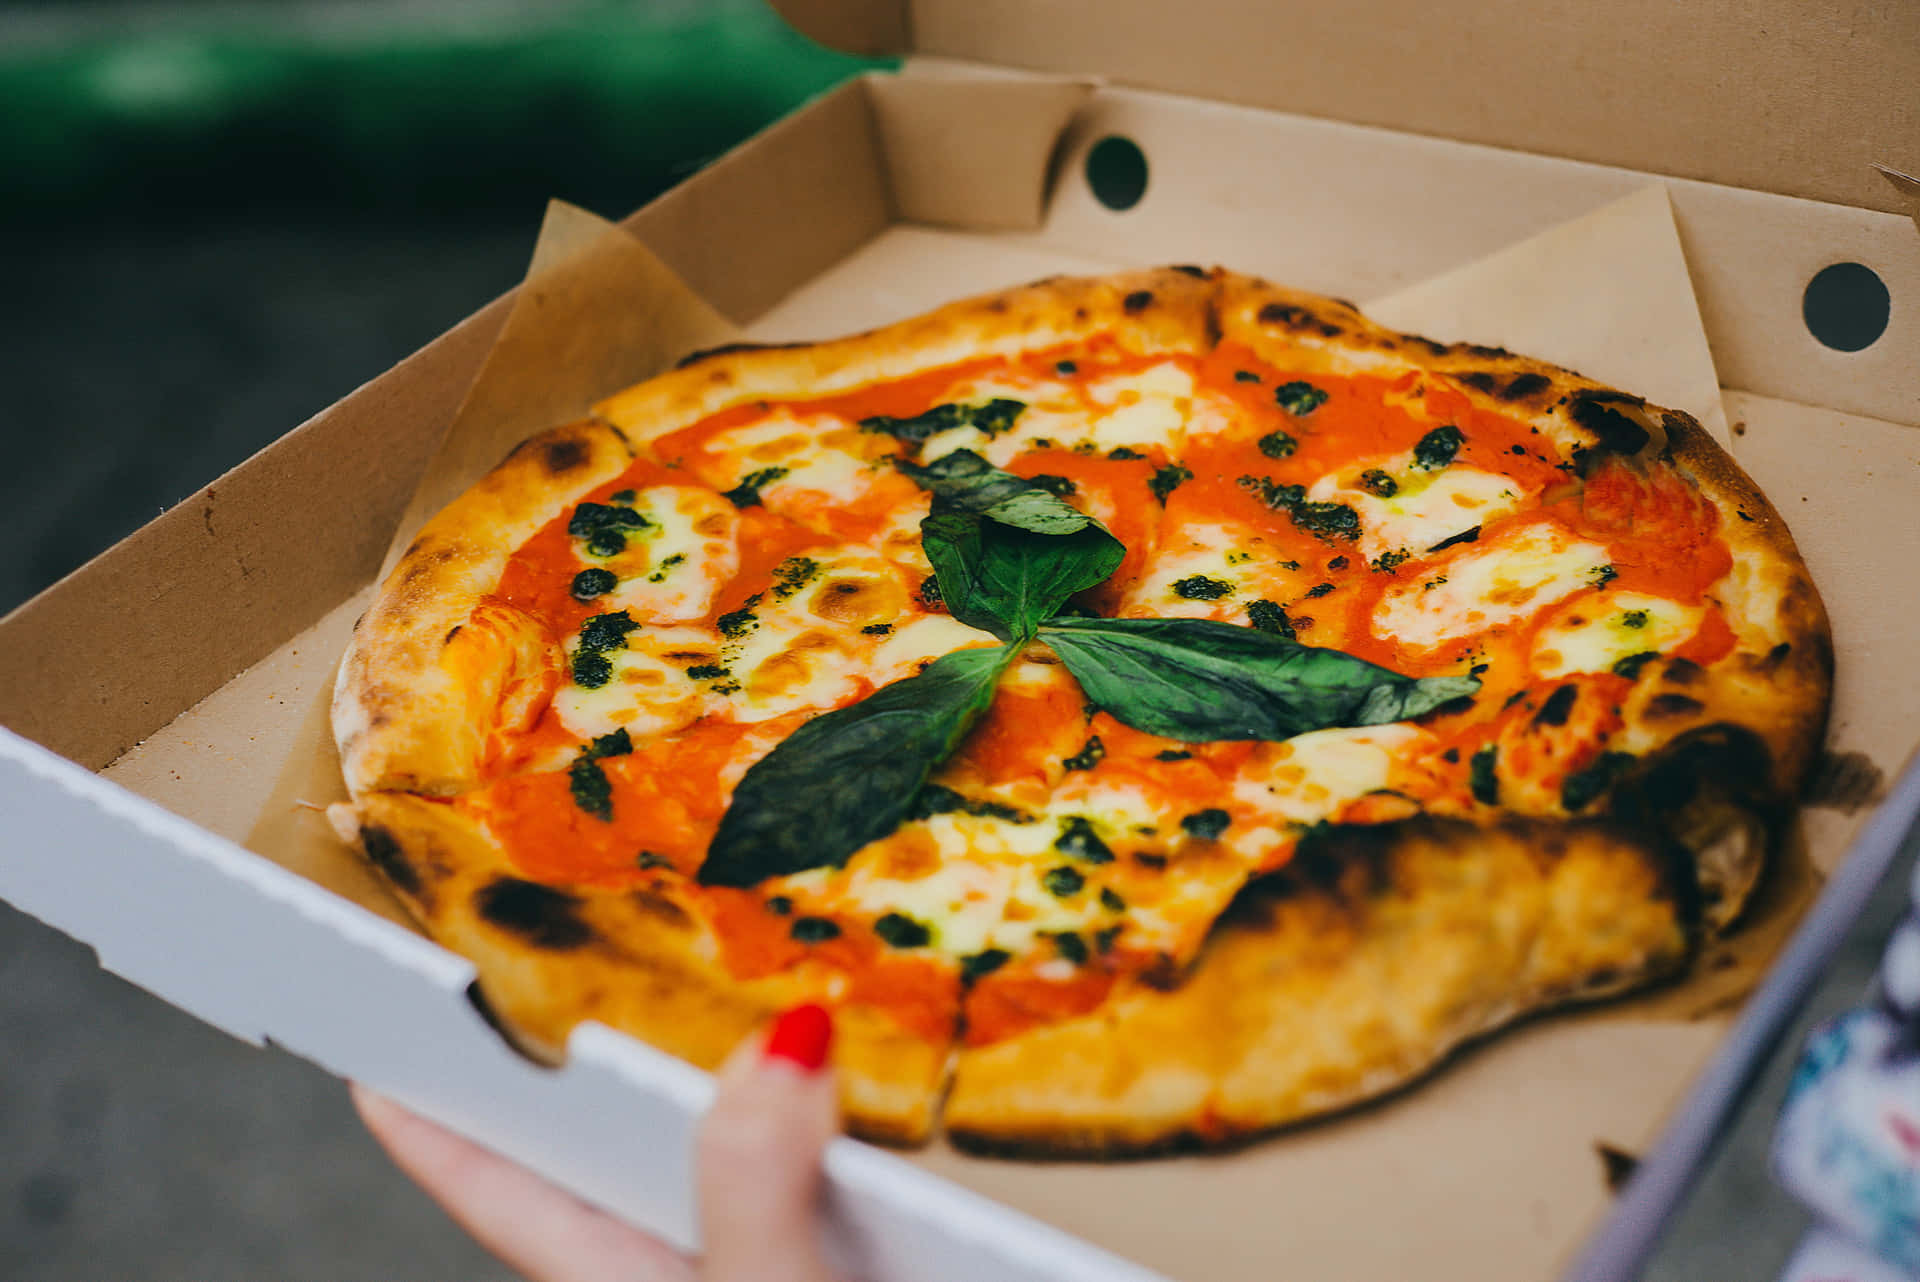 Enjoy a delicious slice of classic Italian-style pizza.